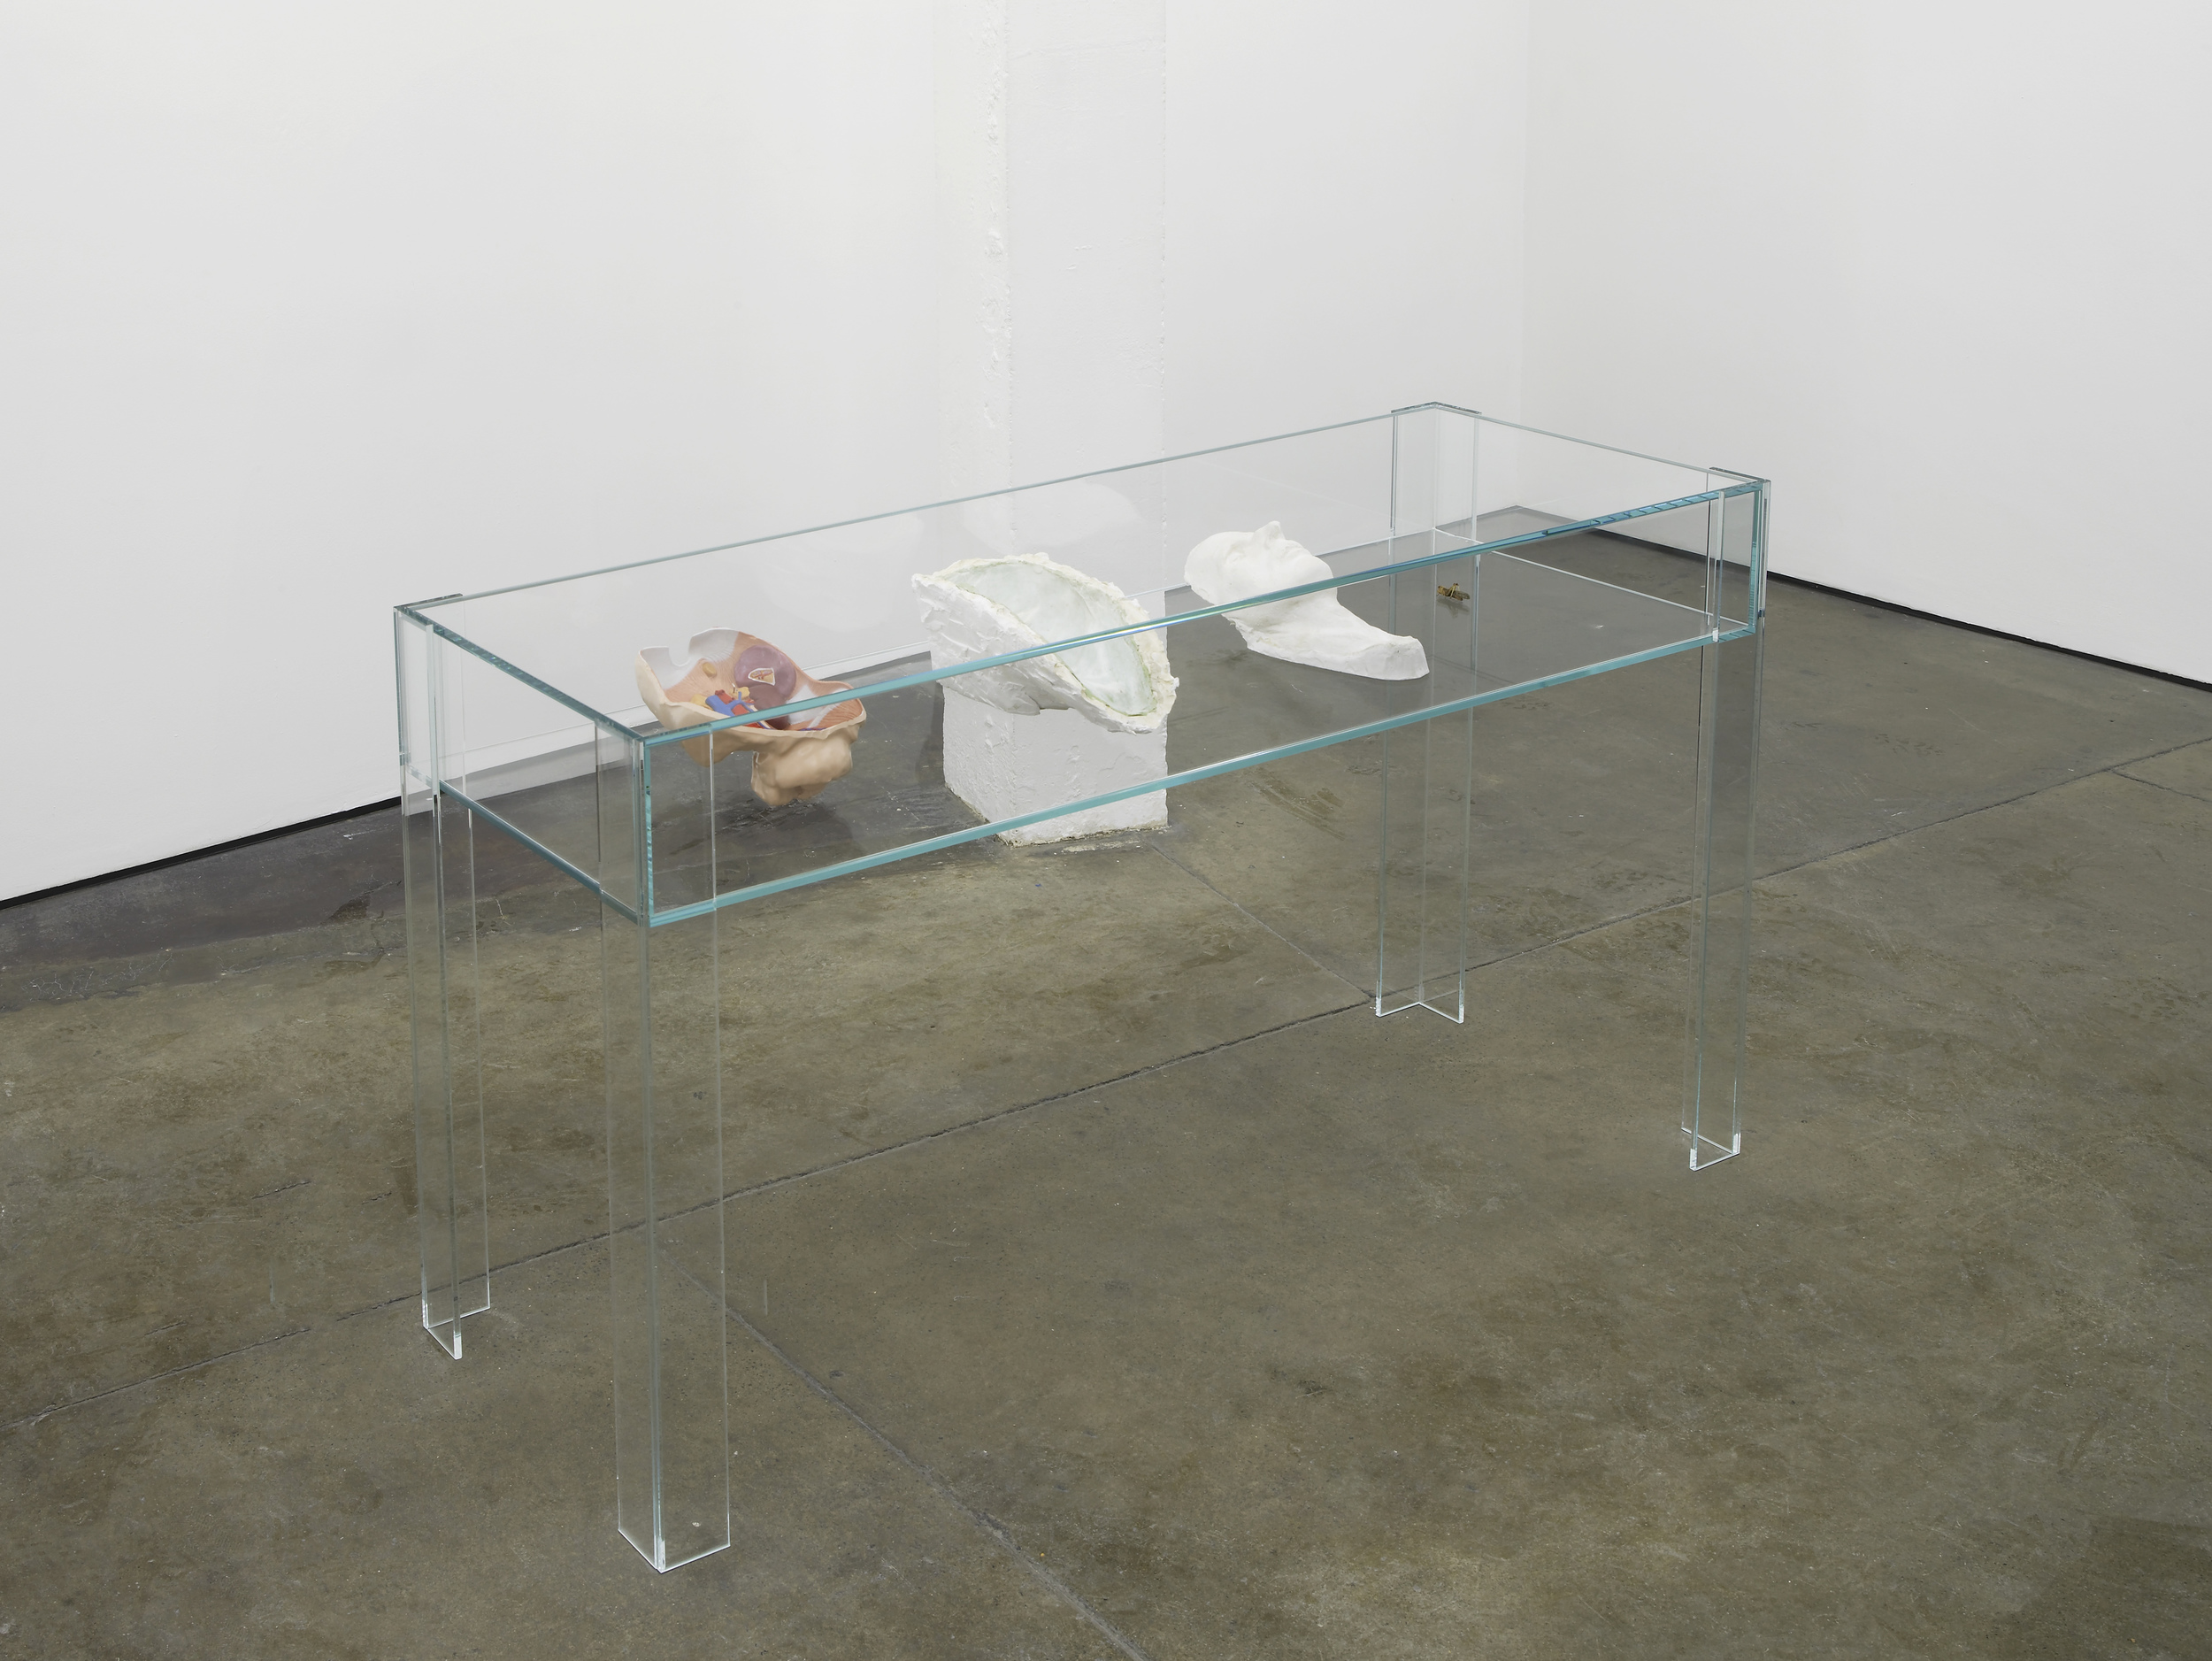      Untitled Vitrine   2012   Plastic anatomical model, silicone mould and plaster cast of a death mask, grasshopper with human hair antennae, glass vitrine   92 x 57.5 x 170 cm / 36.2 x 22.6 x 67 in  